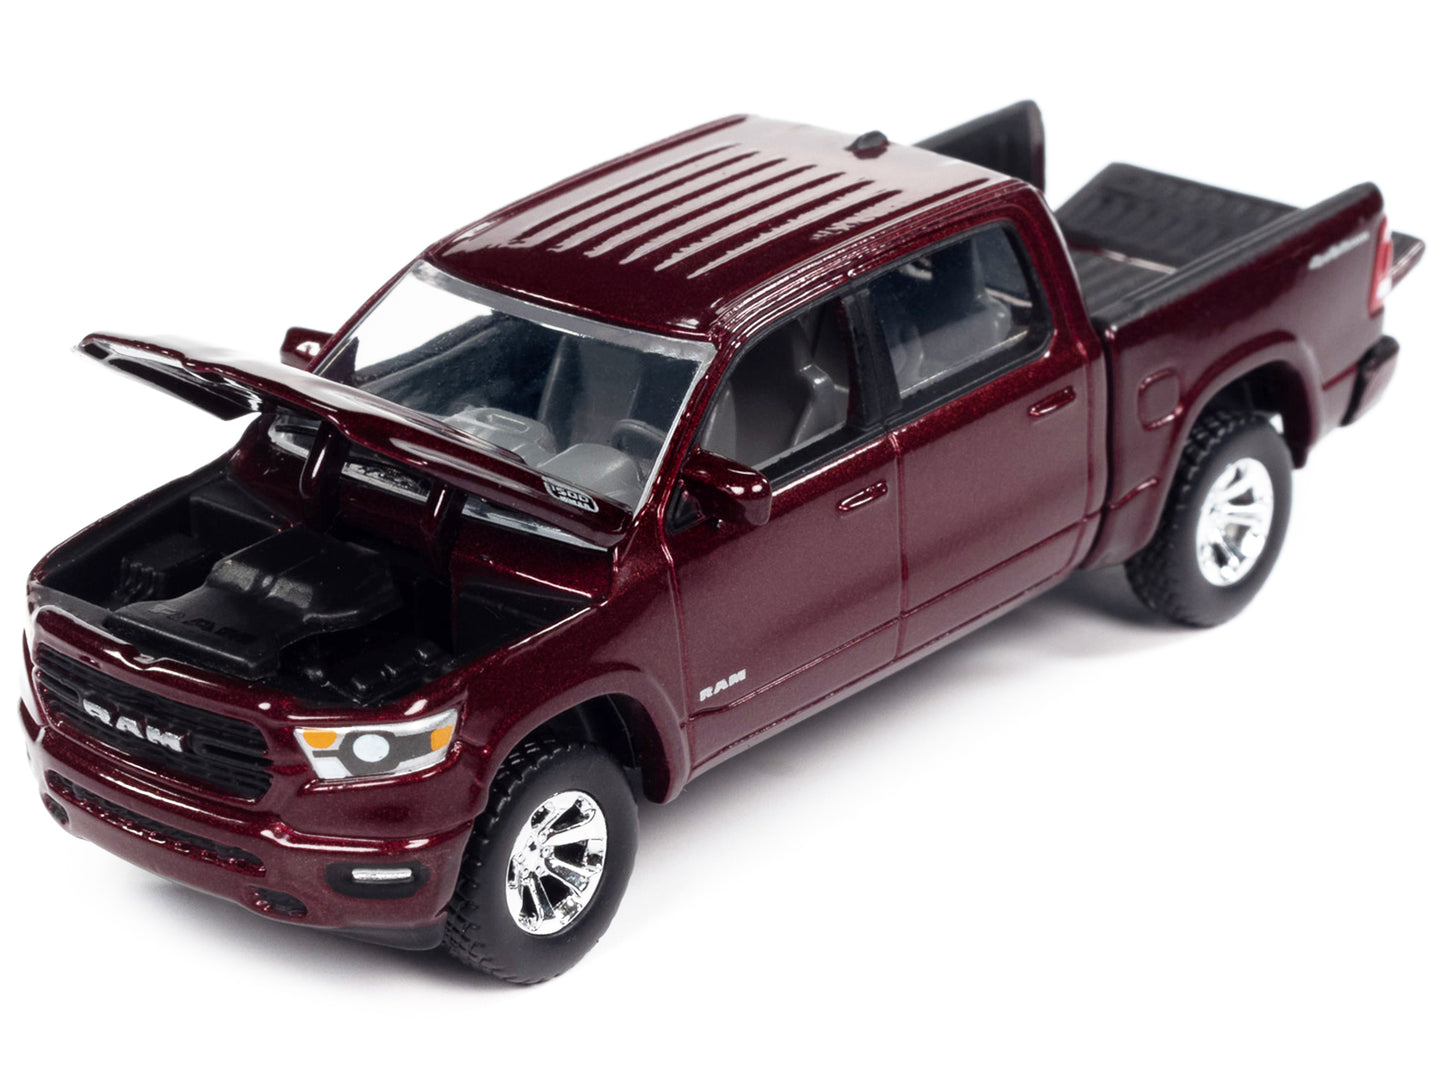 2021 Ram 1500 Big Horn North Edition Pickup Truck Delmonico Red Metallic "Muscle Trucks" Limited Edition 1/64 Diecast Model Car by Auto World